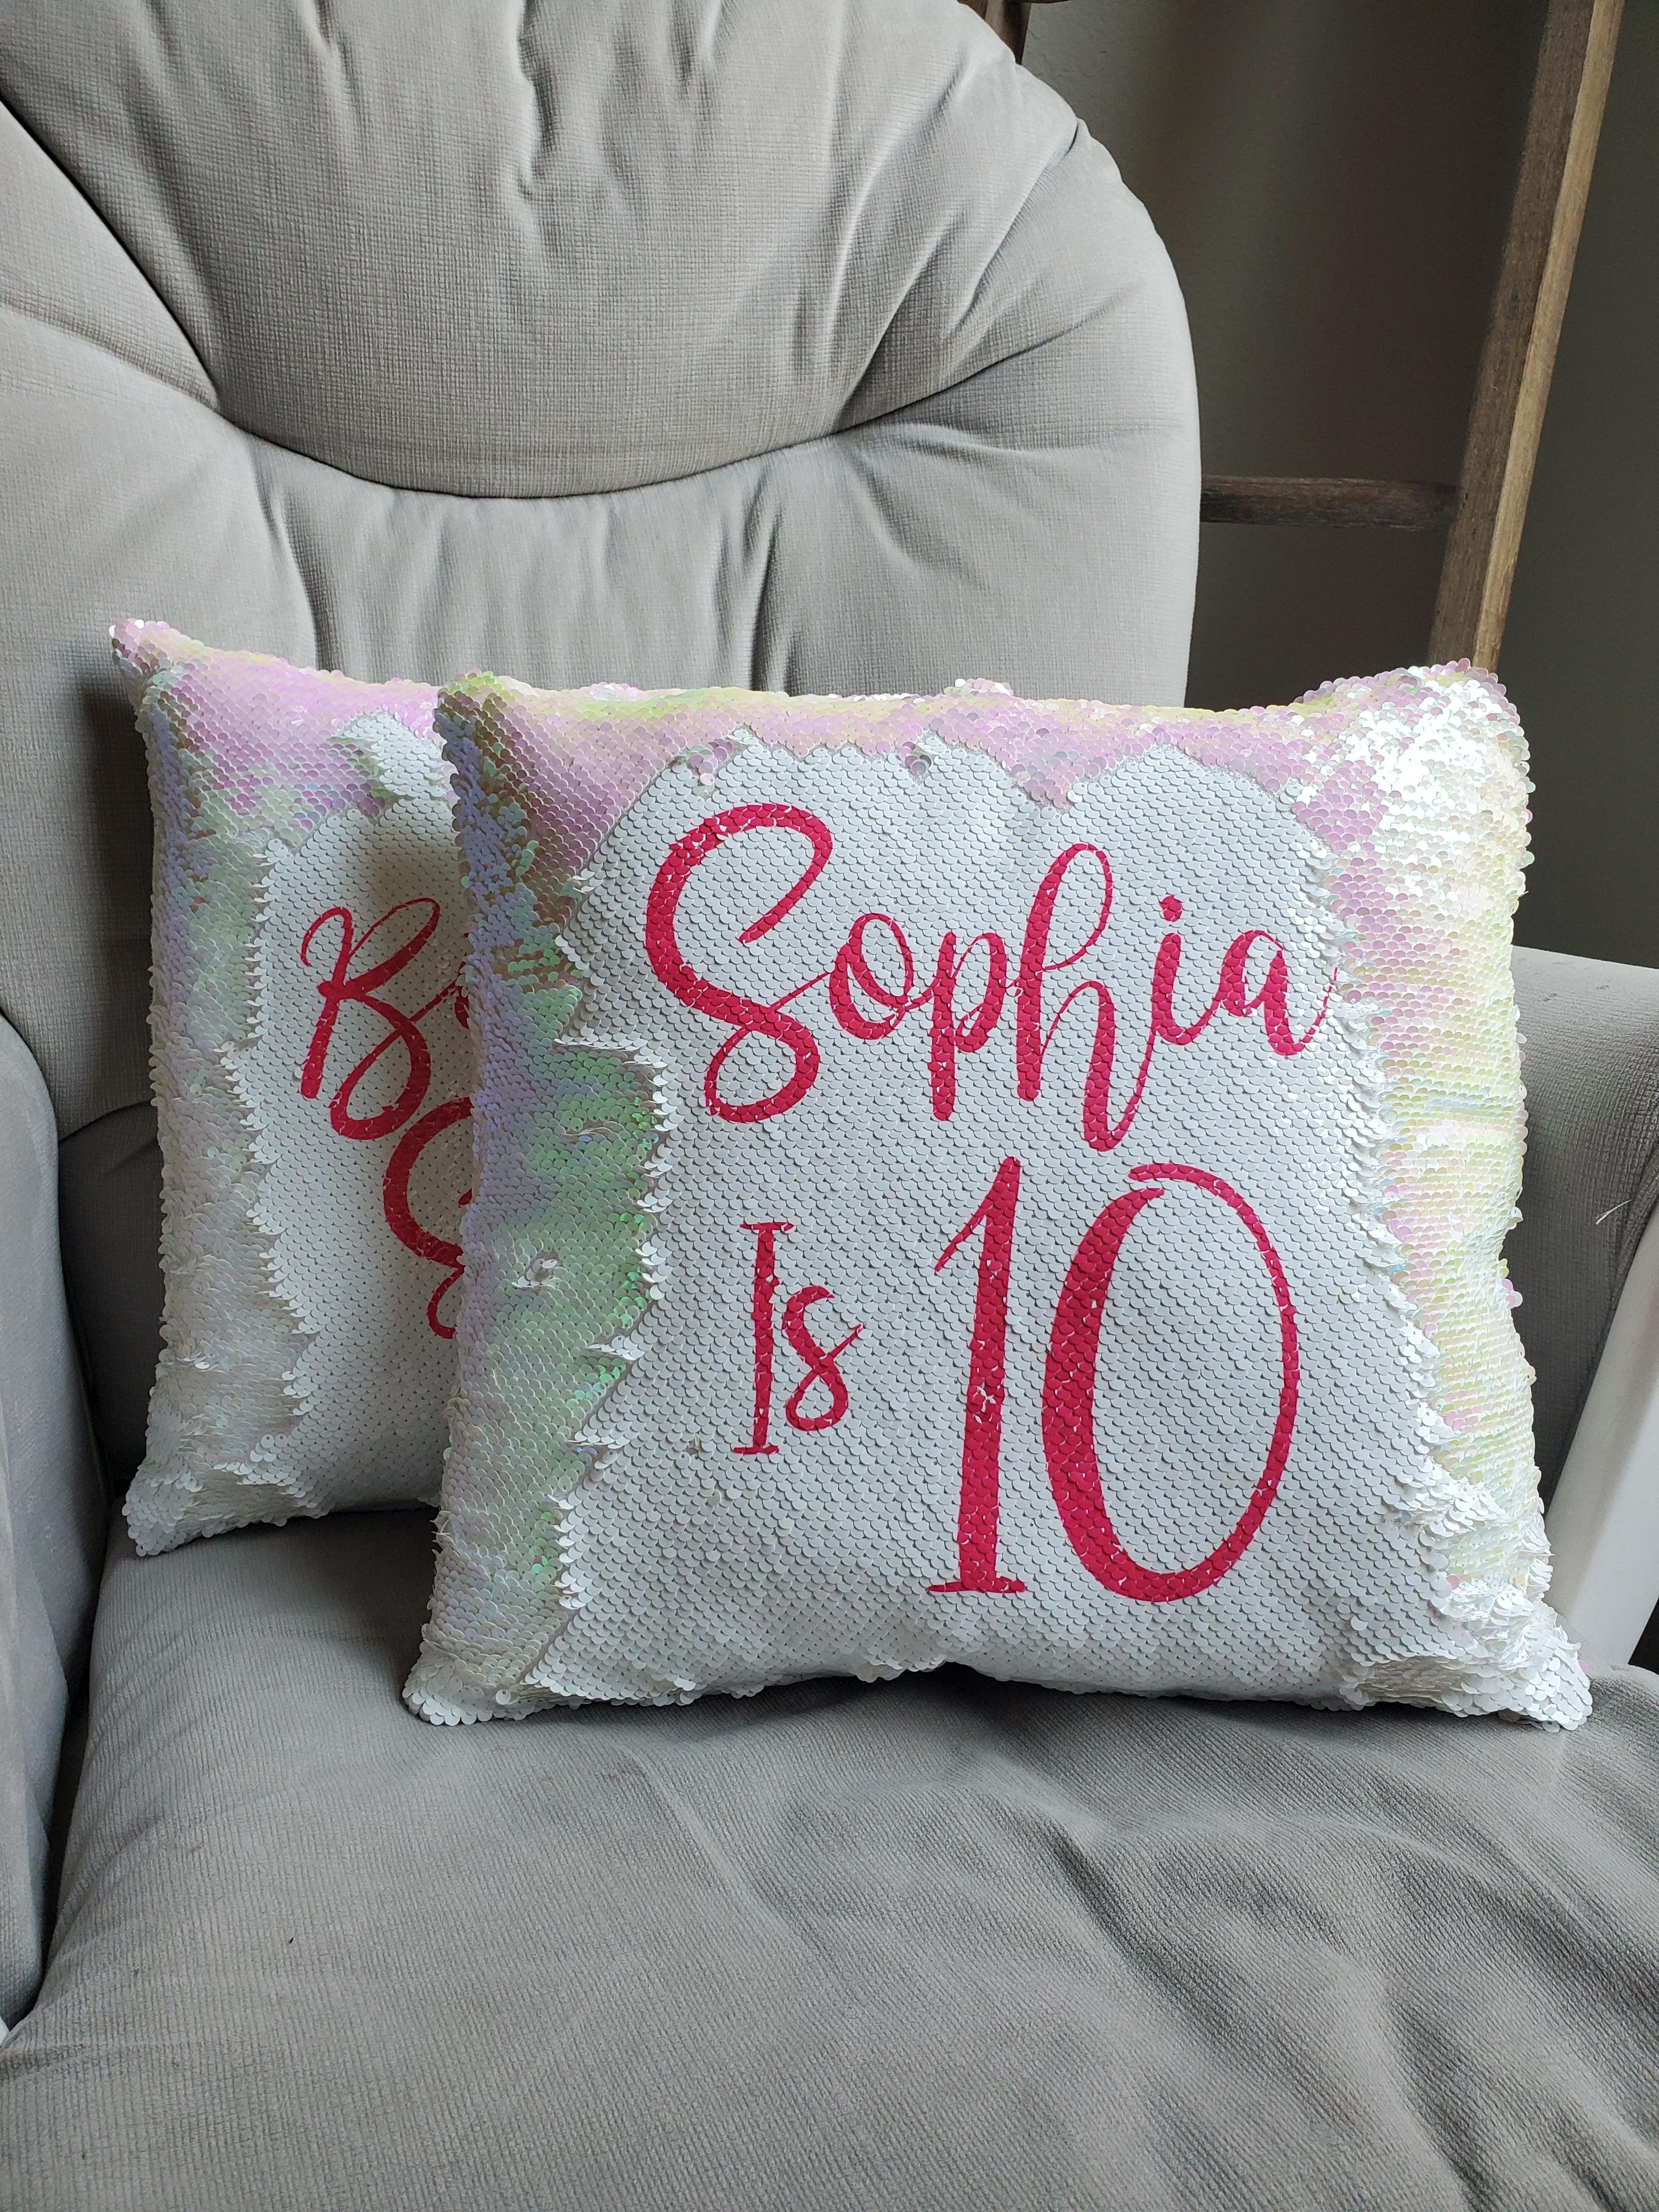 This personalized decorative "Your Text Here" pillow makes a great gift for any teenager birthday girl or boy. The reversible sequin or non sequin pillow case is perfect for the child's room and for them to enjoy during a movie or tv time. They are also great for when taking a nap in the couch, bed or car, etc. They make a great addition to a glamping tent party as well.